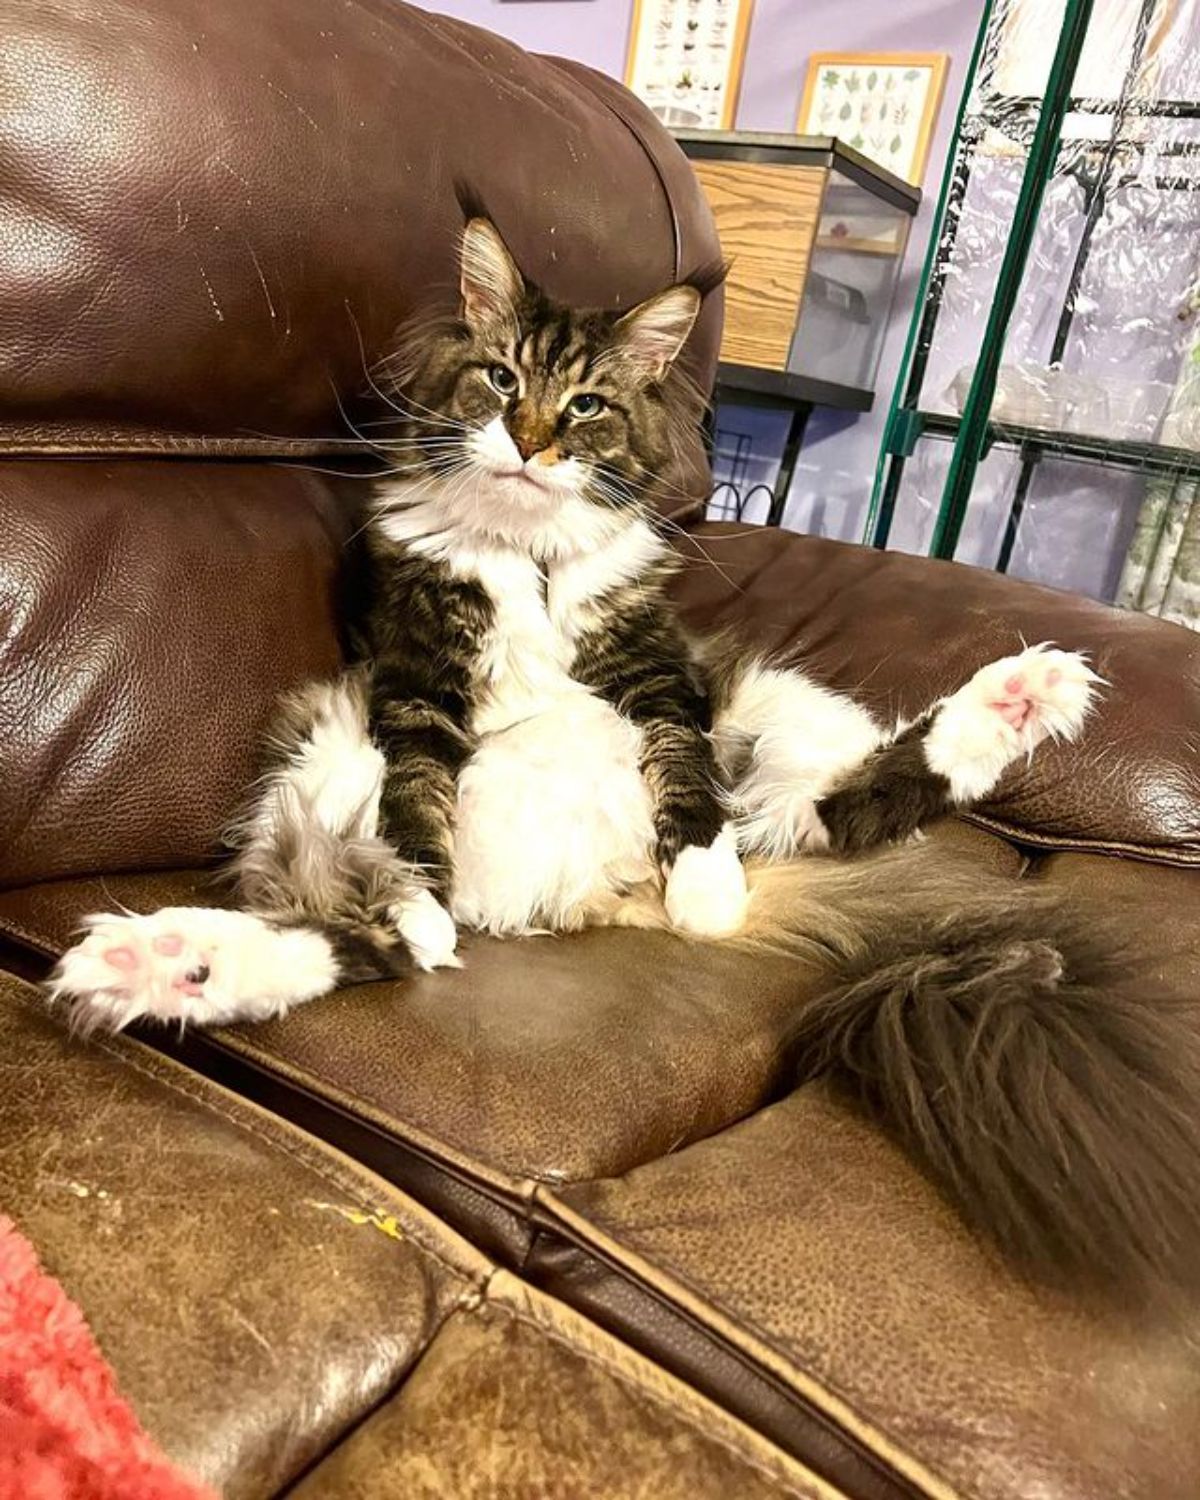 A fluffy maine coon sitting on a couch like a human.